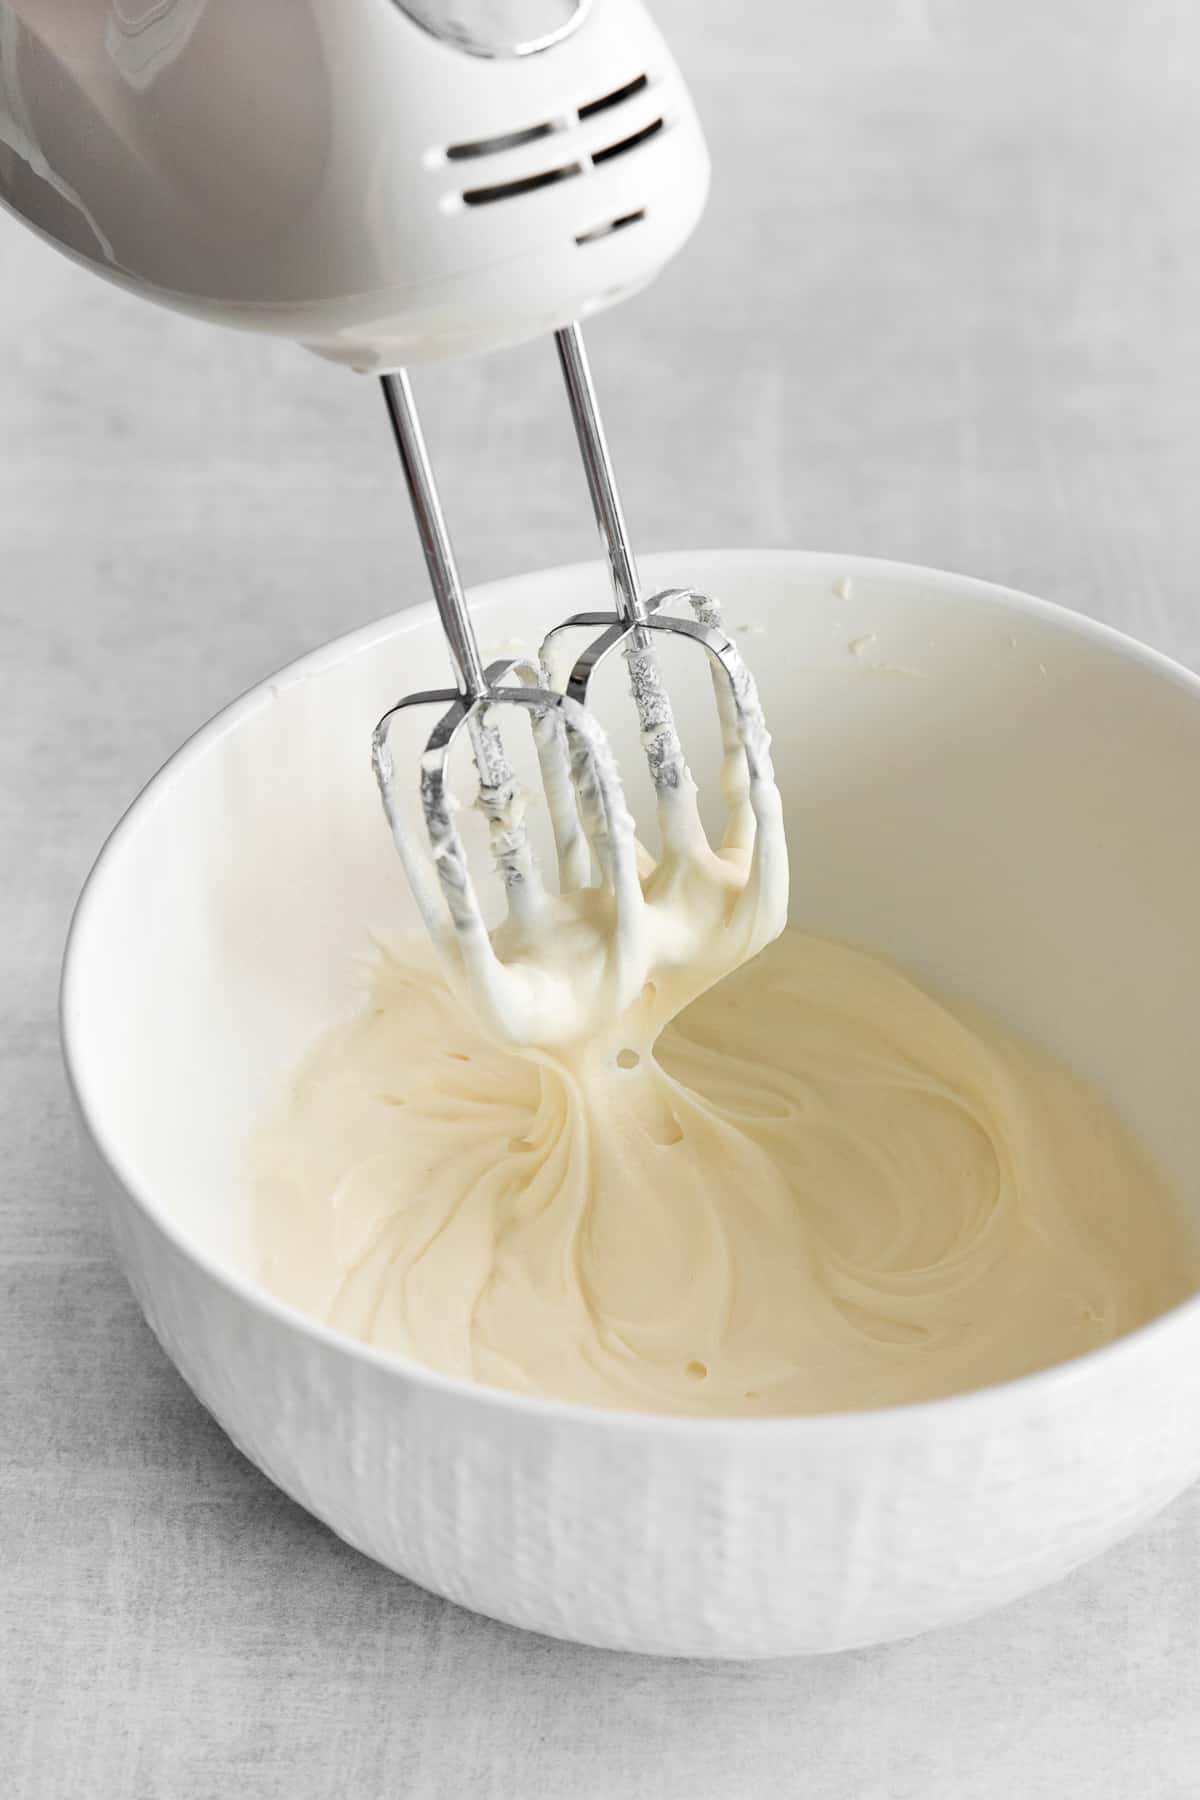 Whipped cream cheese frosting in a bowl with a hand mixer. 